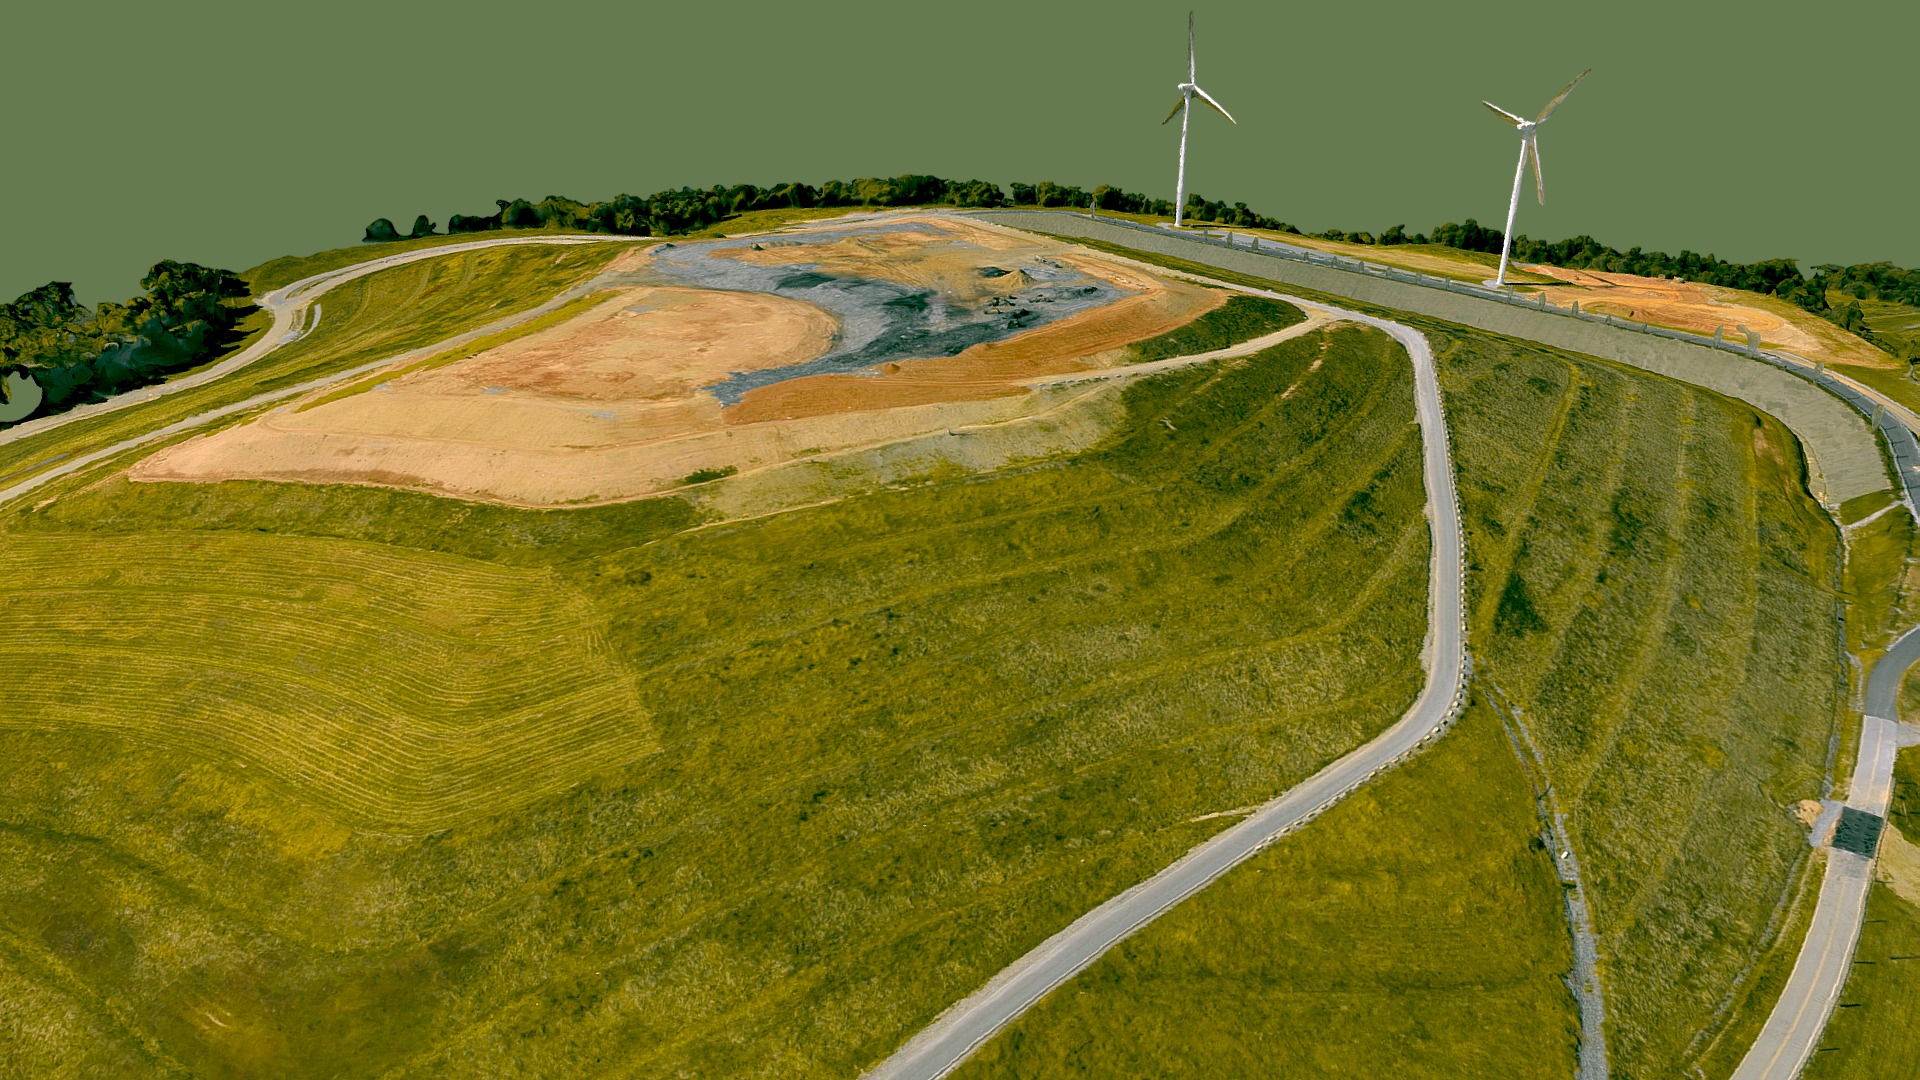 3D model Windmills - This is a 3D model of the Windmills. The 3D model is about a large field with windmills.